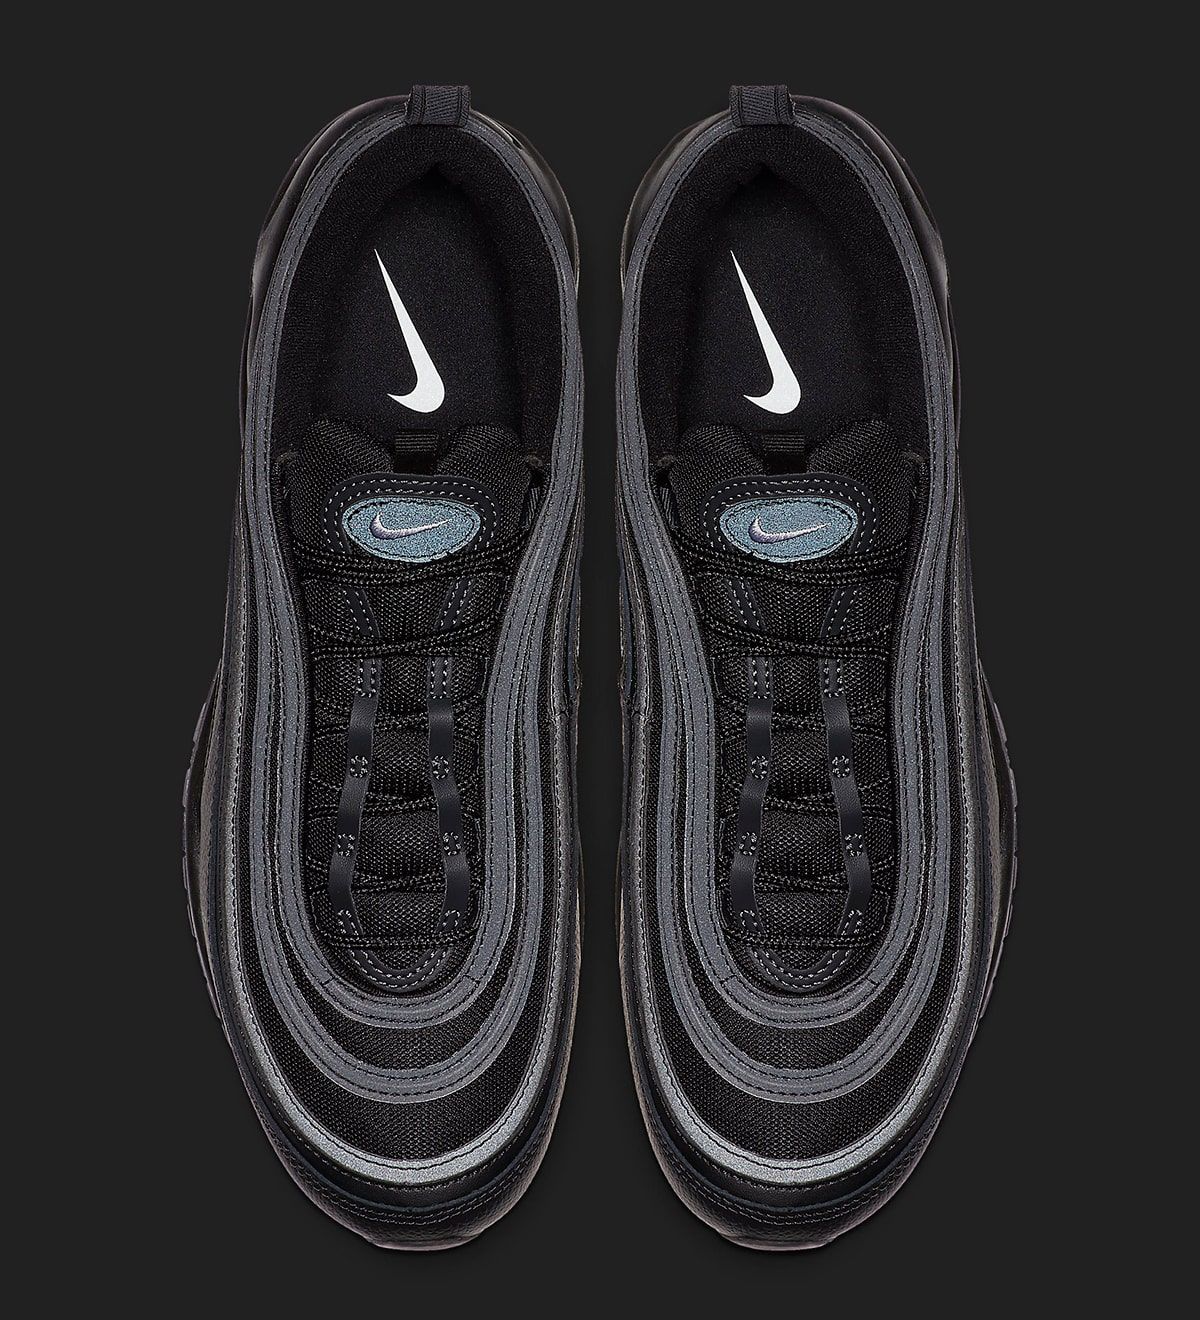 Air Max 97s Feature Acid Wash Panels 